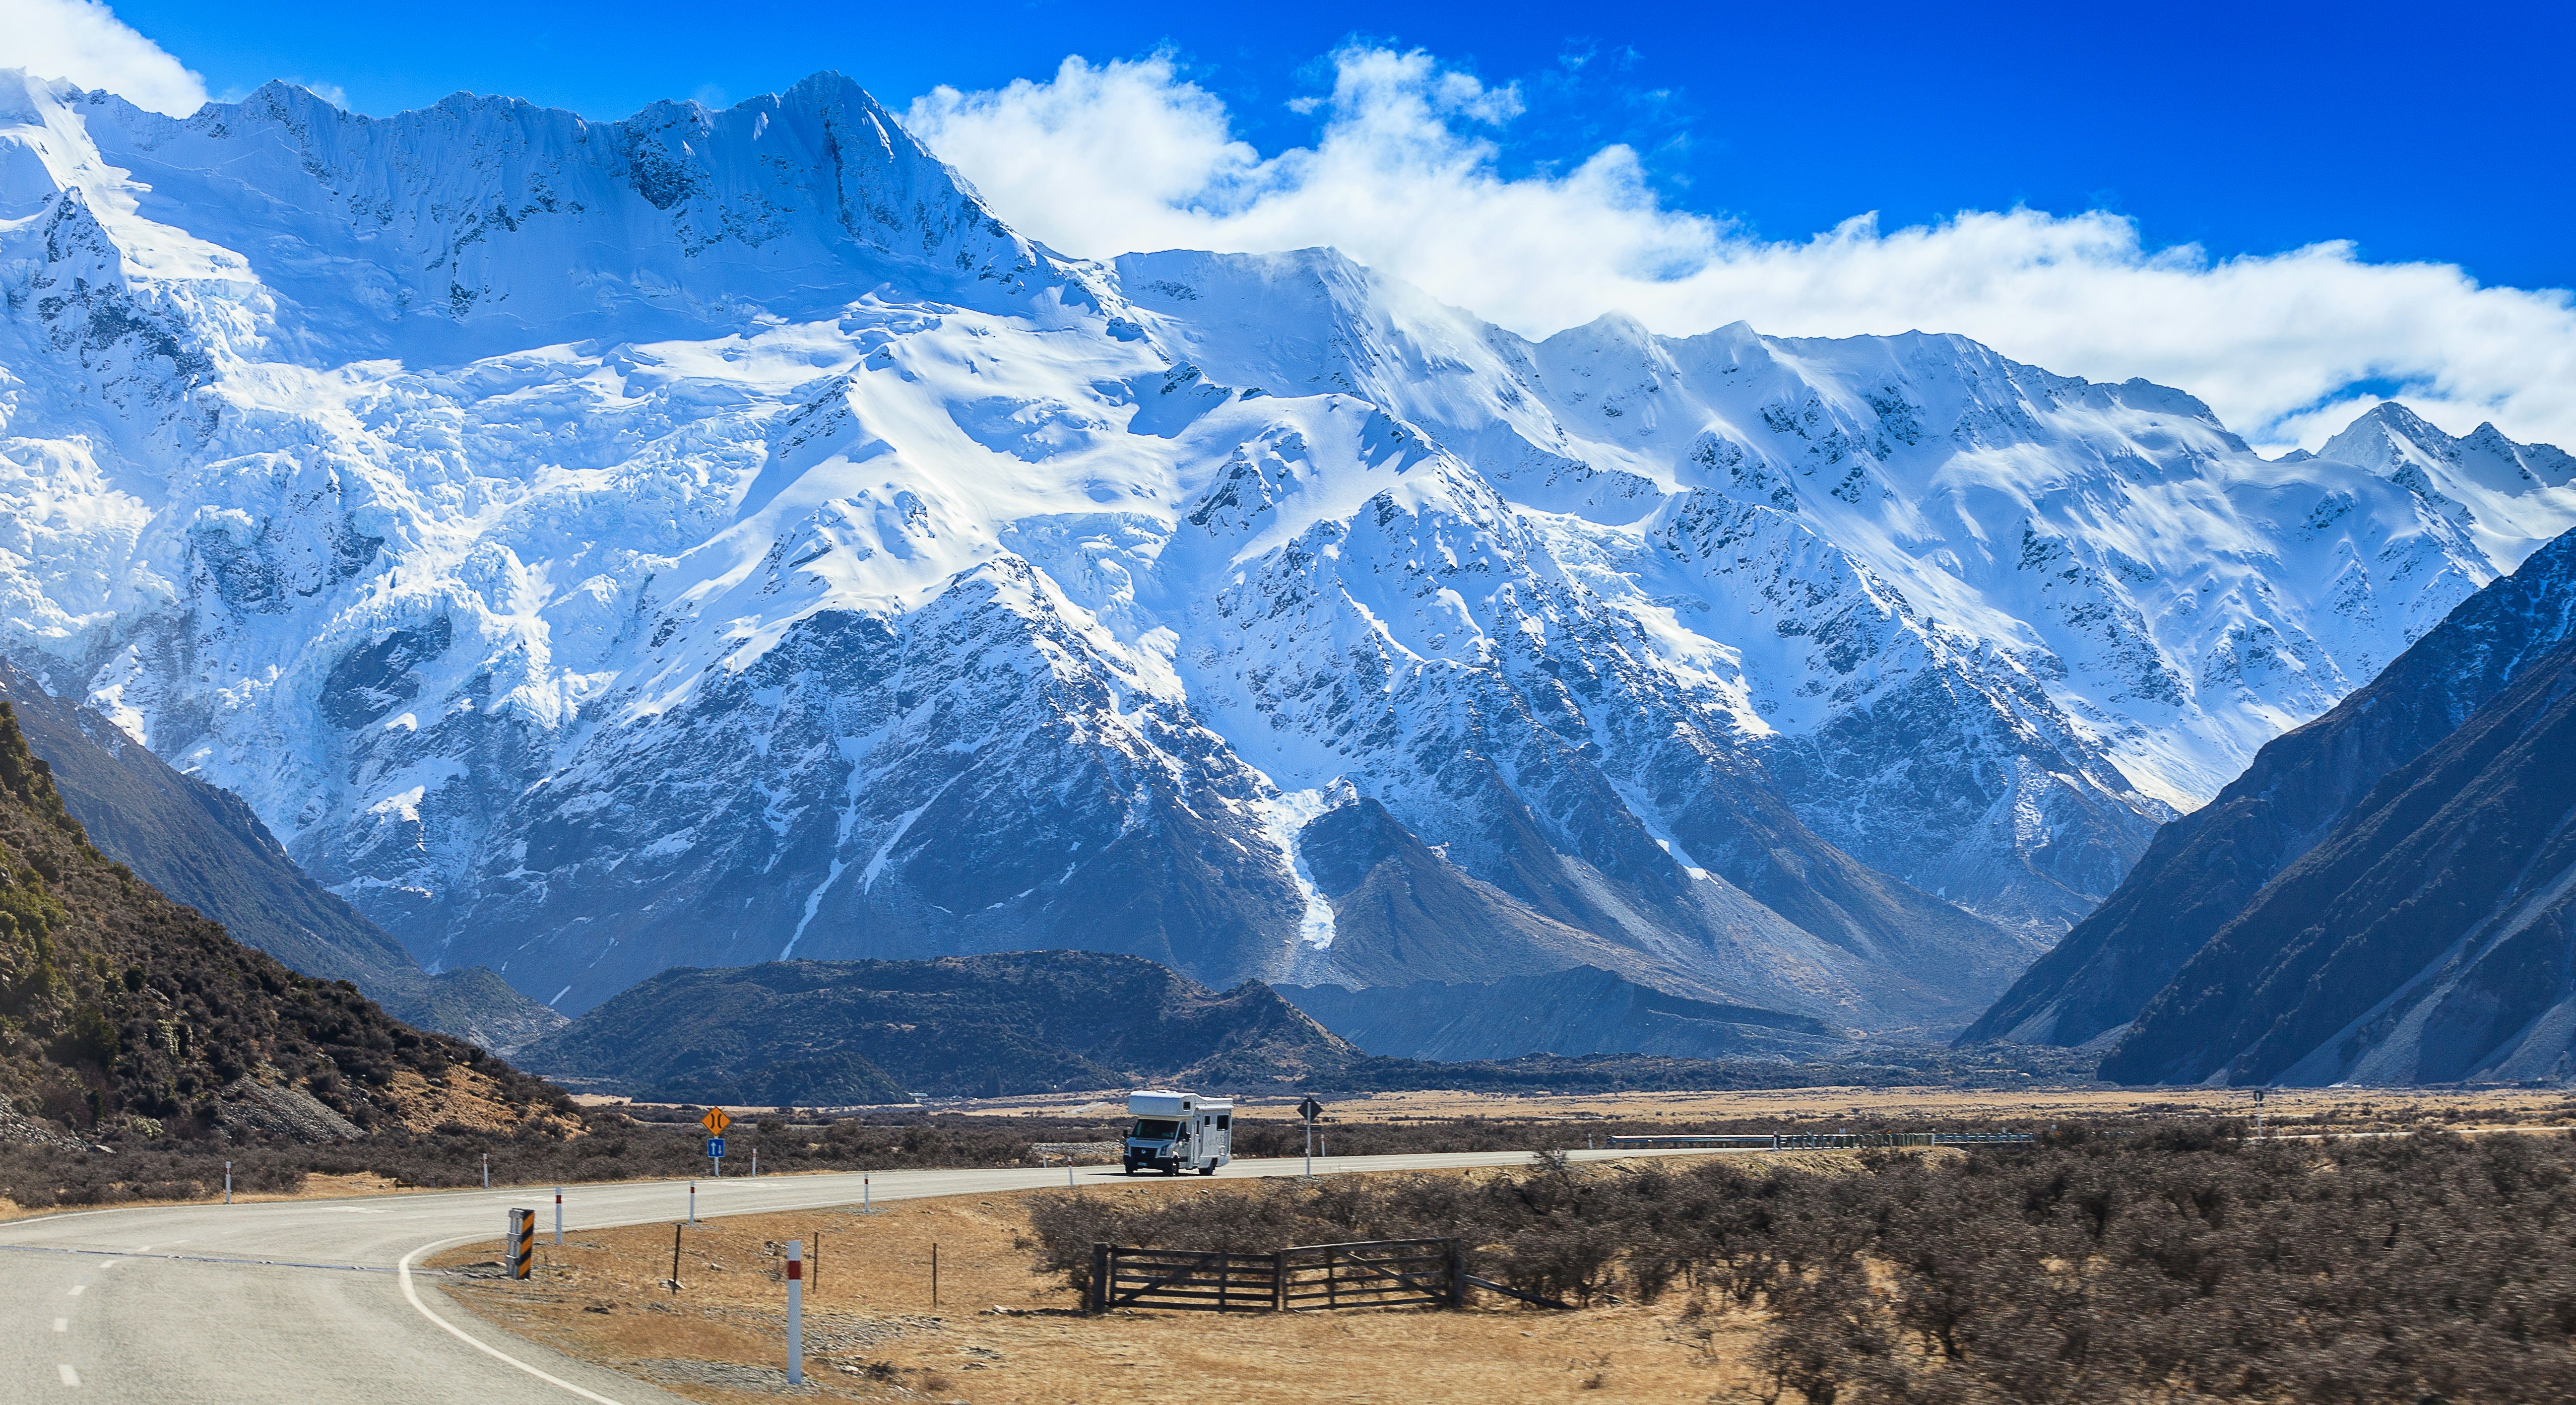 A massive snow-capped mountain range towers over a road. A camper van is the only vehicle on the road